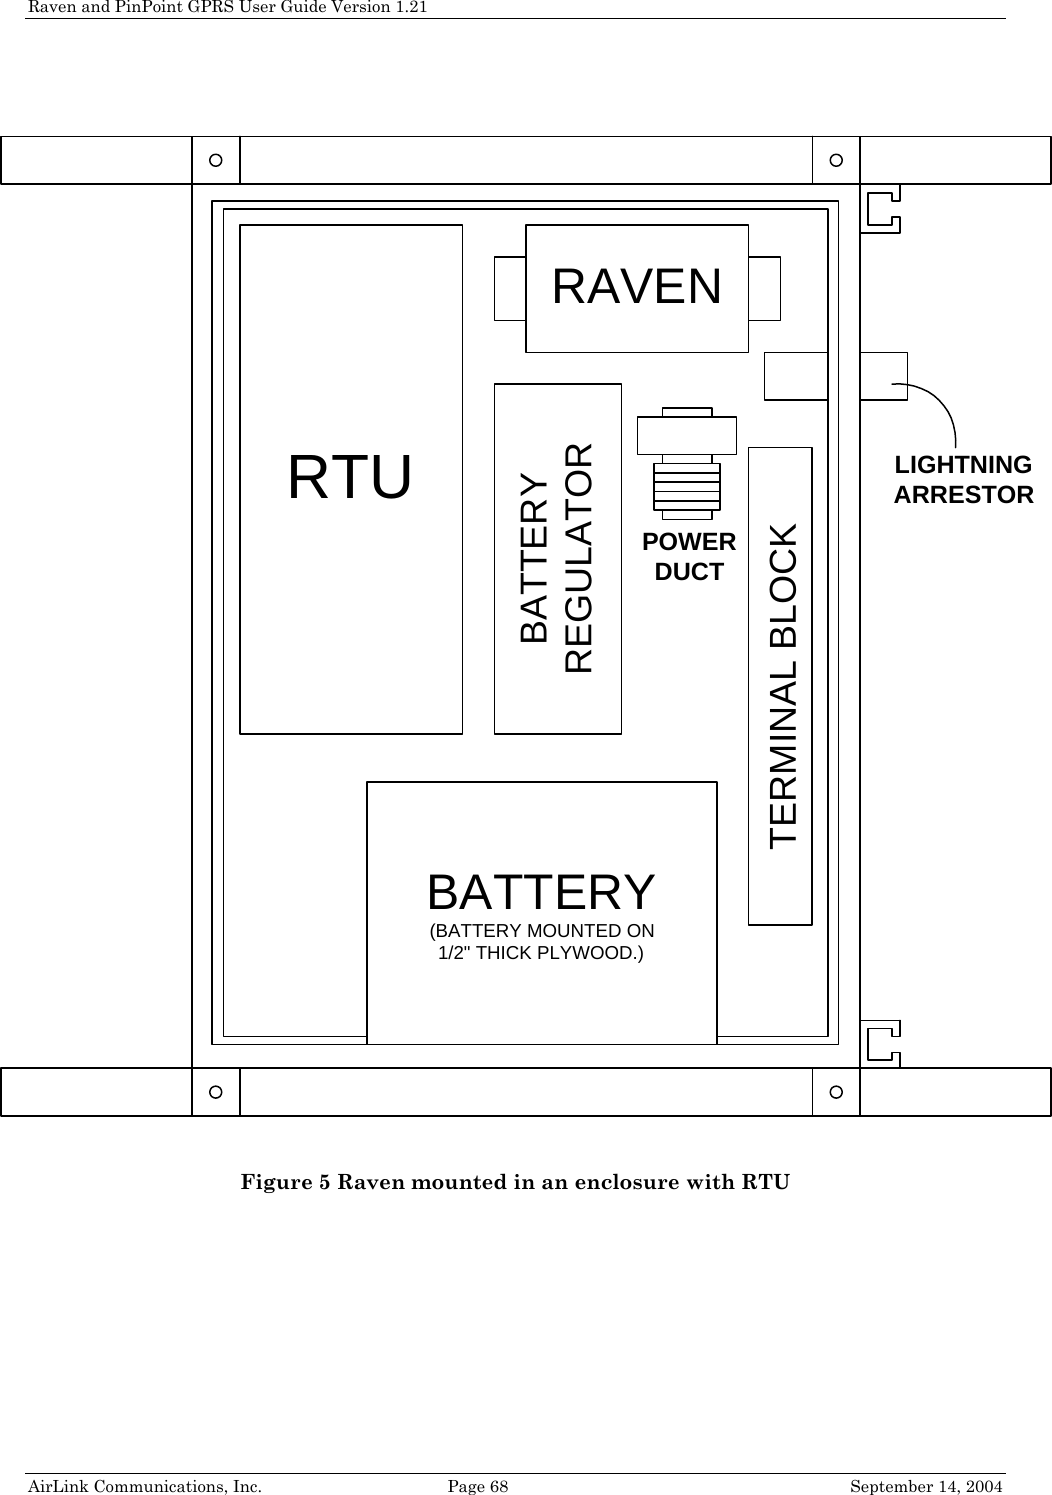 Raven and PinPoint GPRS User Guide Version 1.21   RTURAVENBATTERYREGULATORTERMINAL BLOCKPOWERDUCTLIGHTNINGARRESTORBATTERY(BATTERY MOUNTED ON1/2&quot; THICK PLYWOOD.)Figure 5 Raven mounted in an enclosure with RTU AirLink Communications, Inc.  Page 68  September 14, 2004 